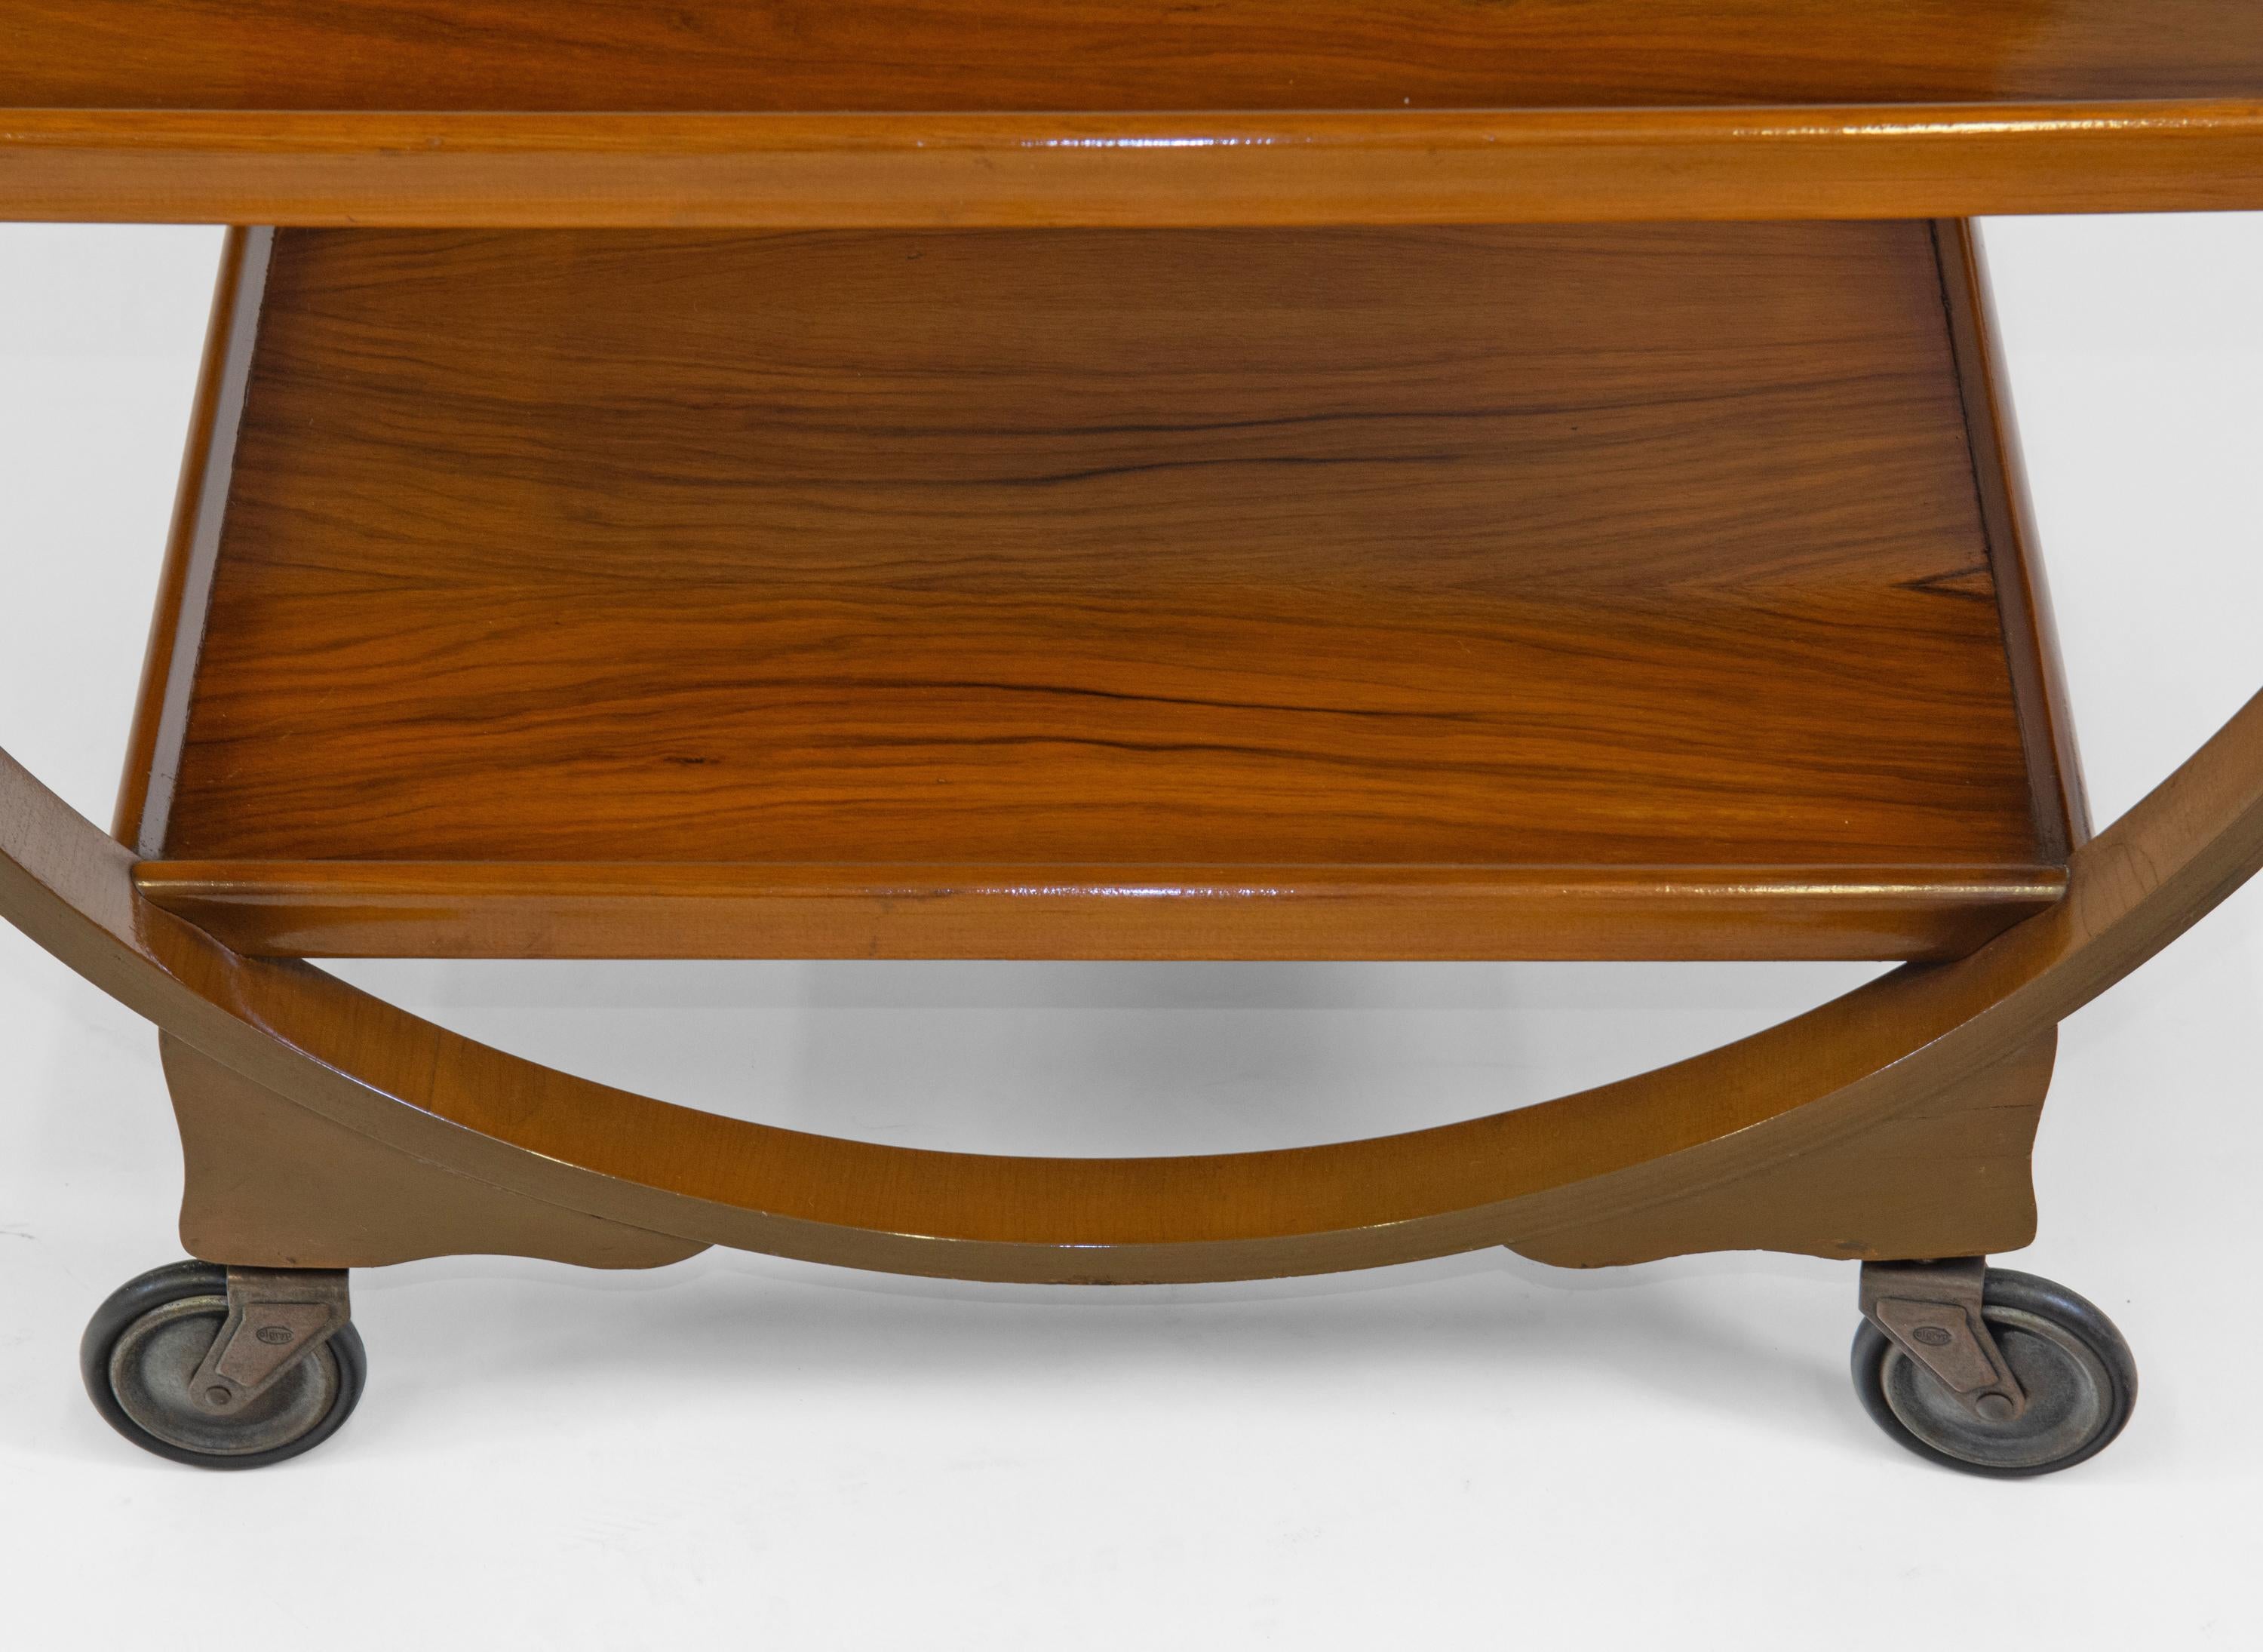 1930s English Art Deco Walnut Round Drinks Cocktail Trolley Modernist Bar Cart For Sale 2